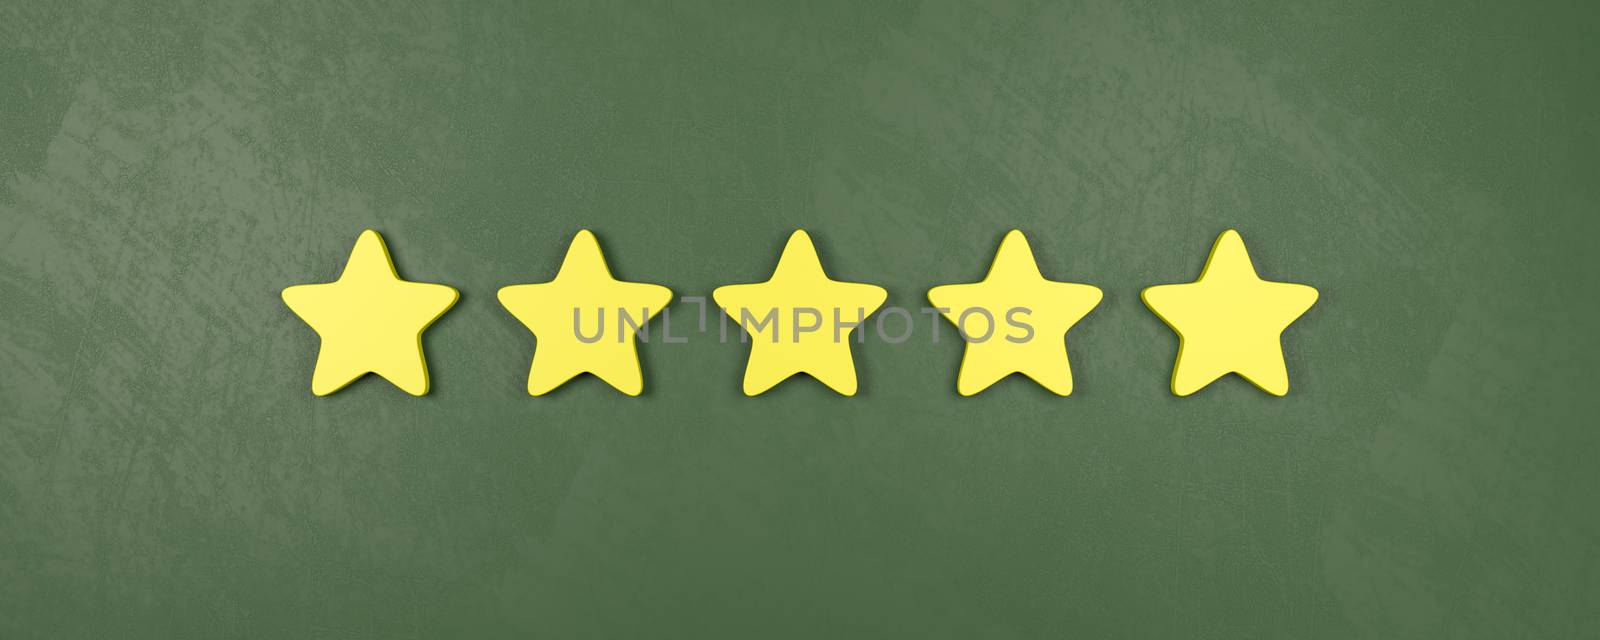 Five of Five Yellow Star Shapes 3D Illustration, Very Good Rating Concepts